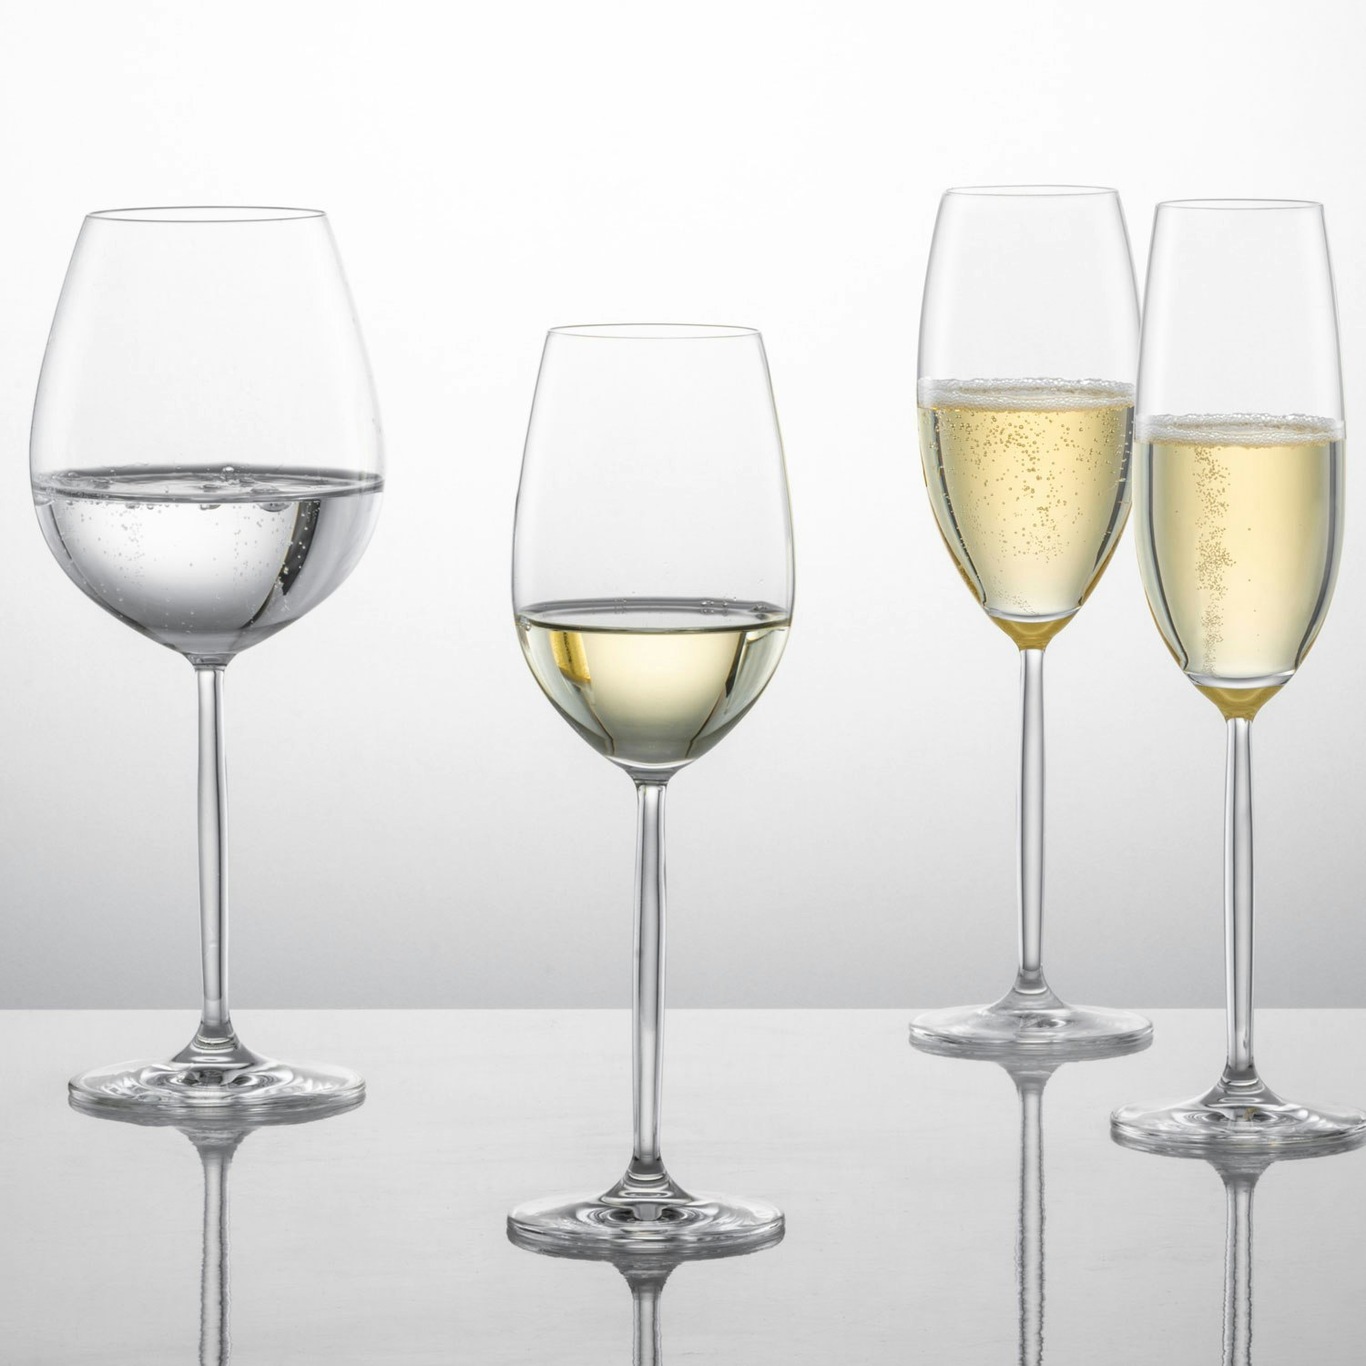 Diva Champagne Glass 30 cl, 2-pack - Zwiesel @ RoyalDesign